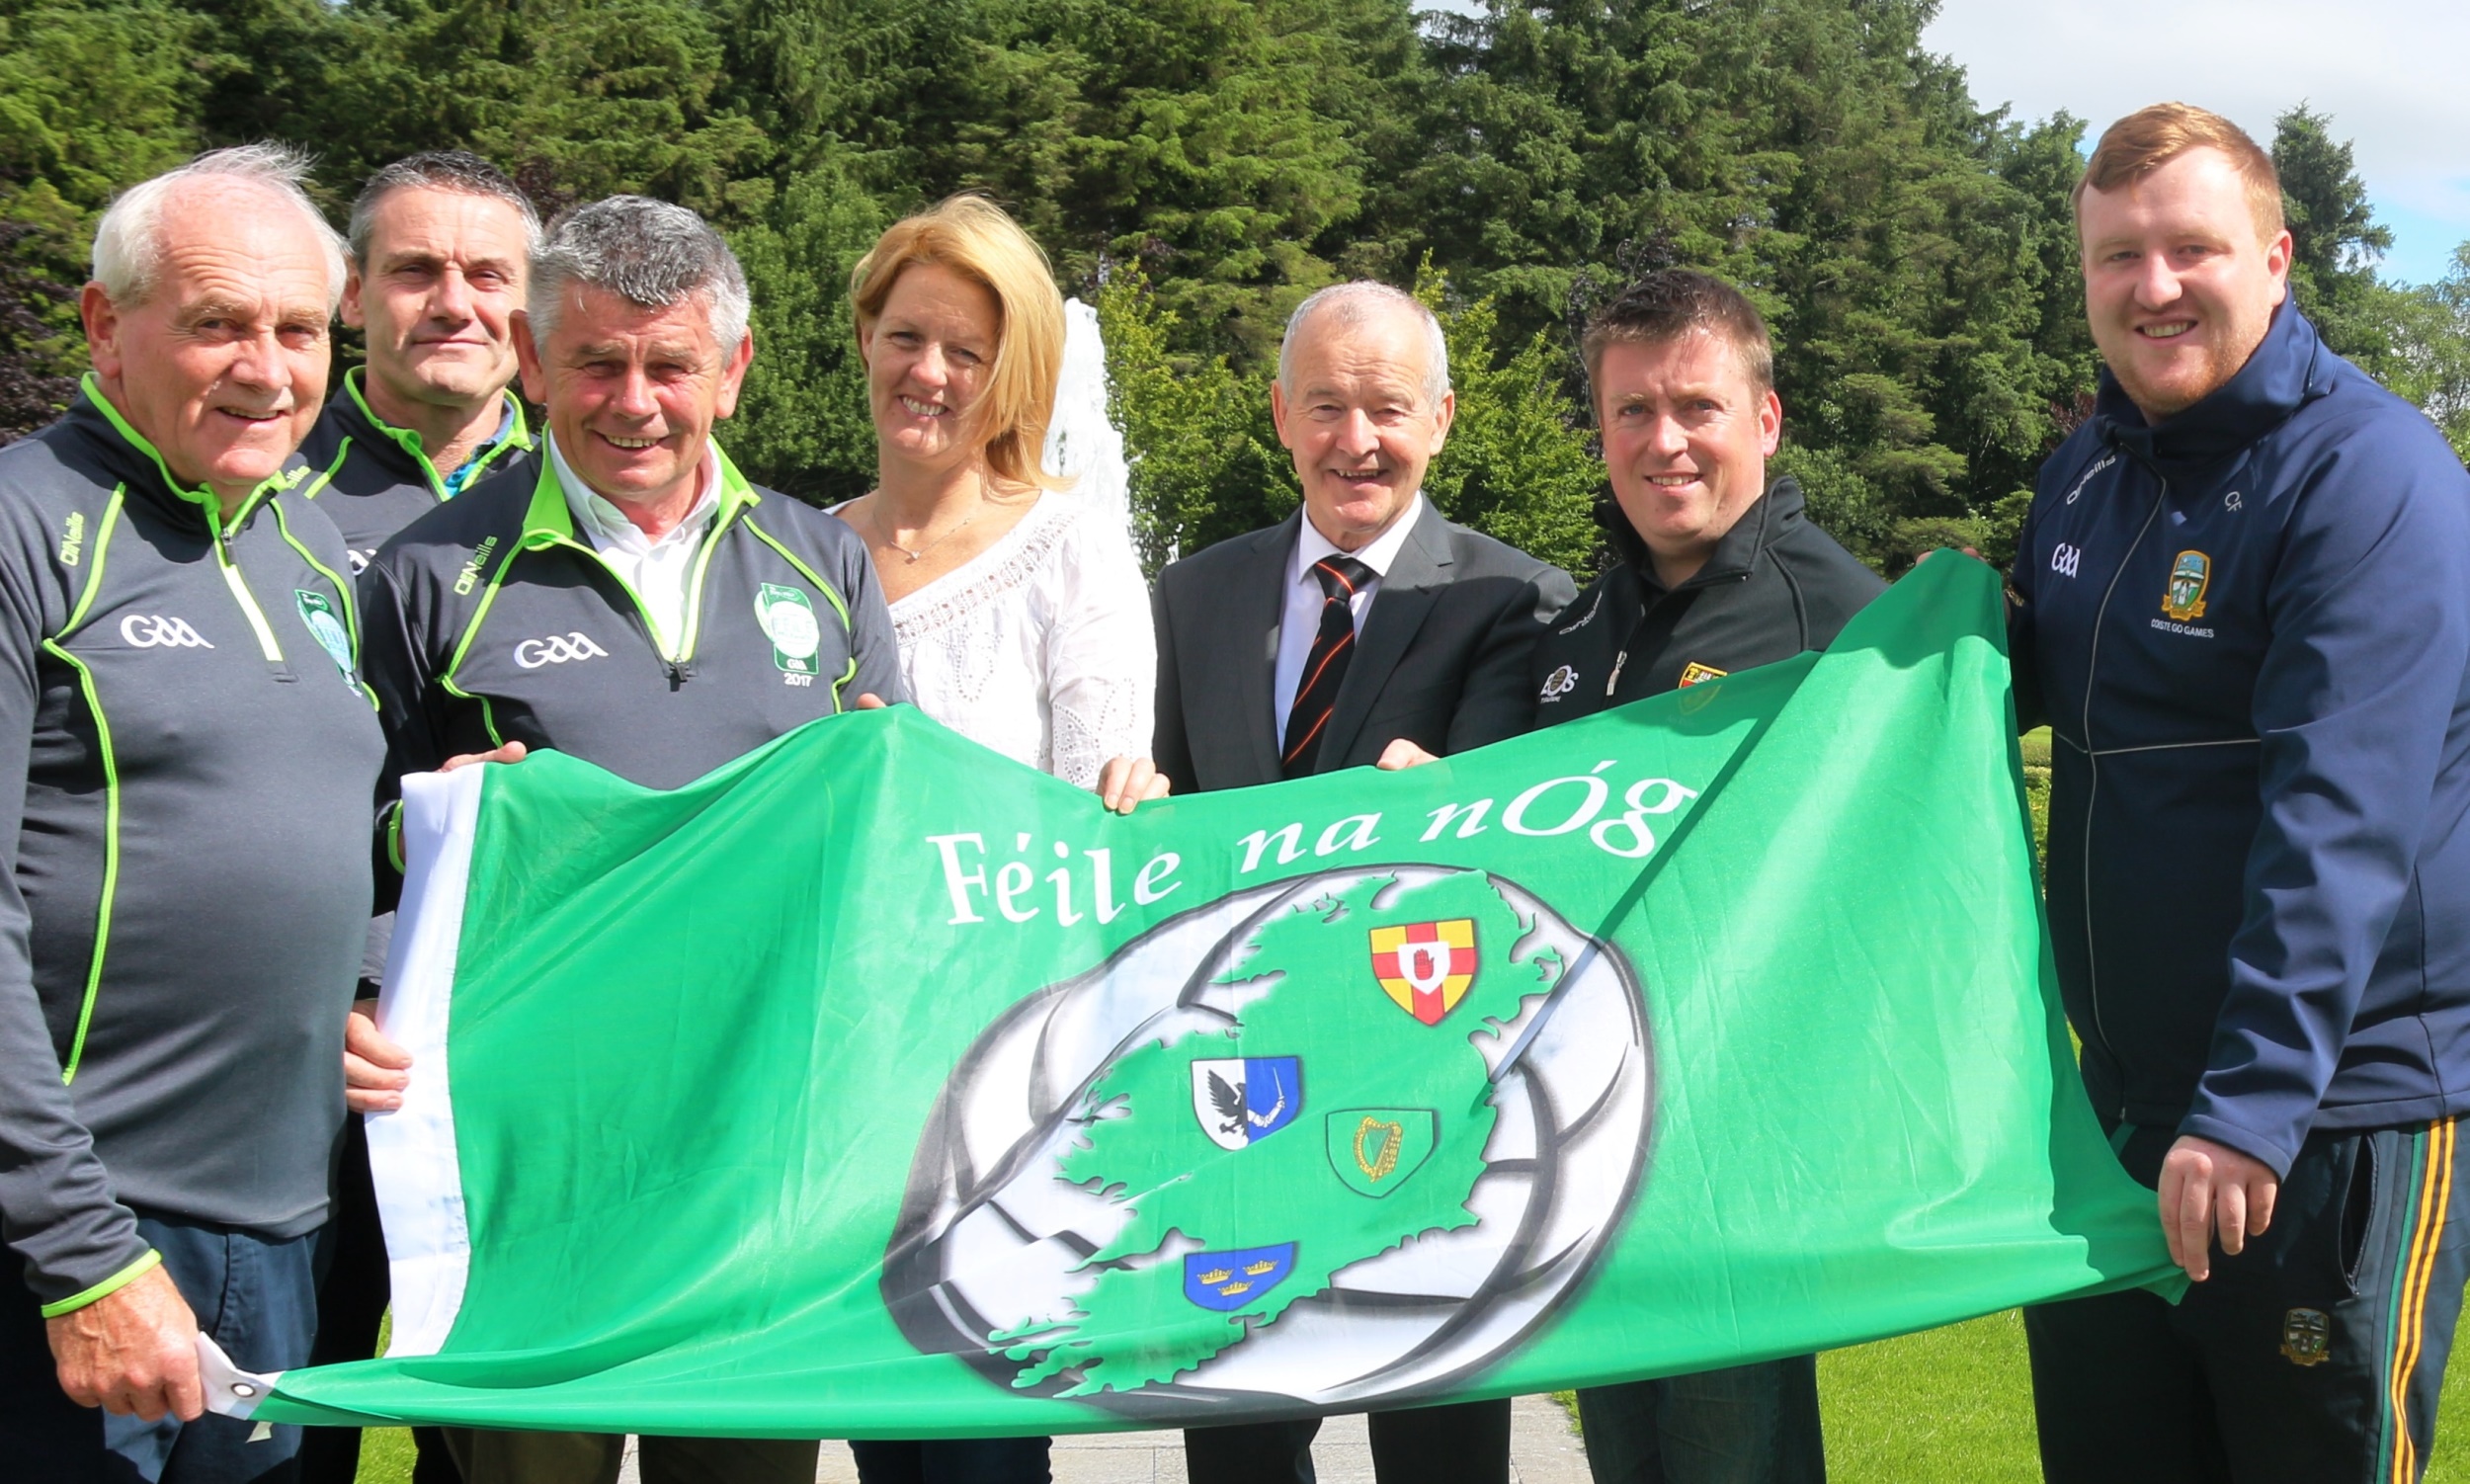 Underage festival of football set for Down, Louth and Meath in 2018